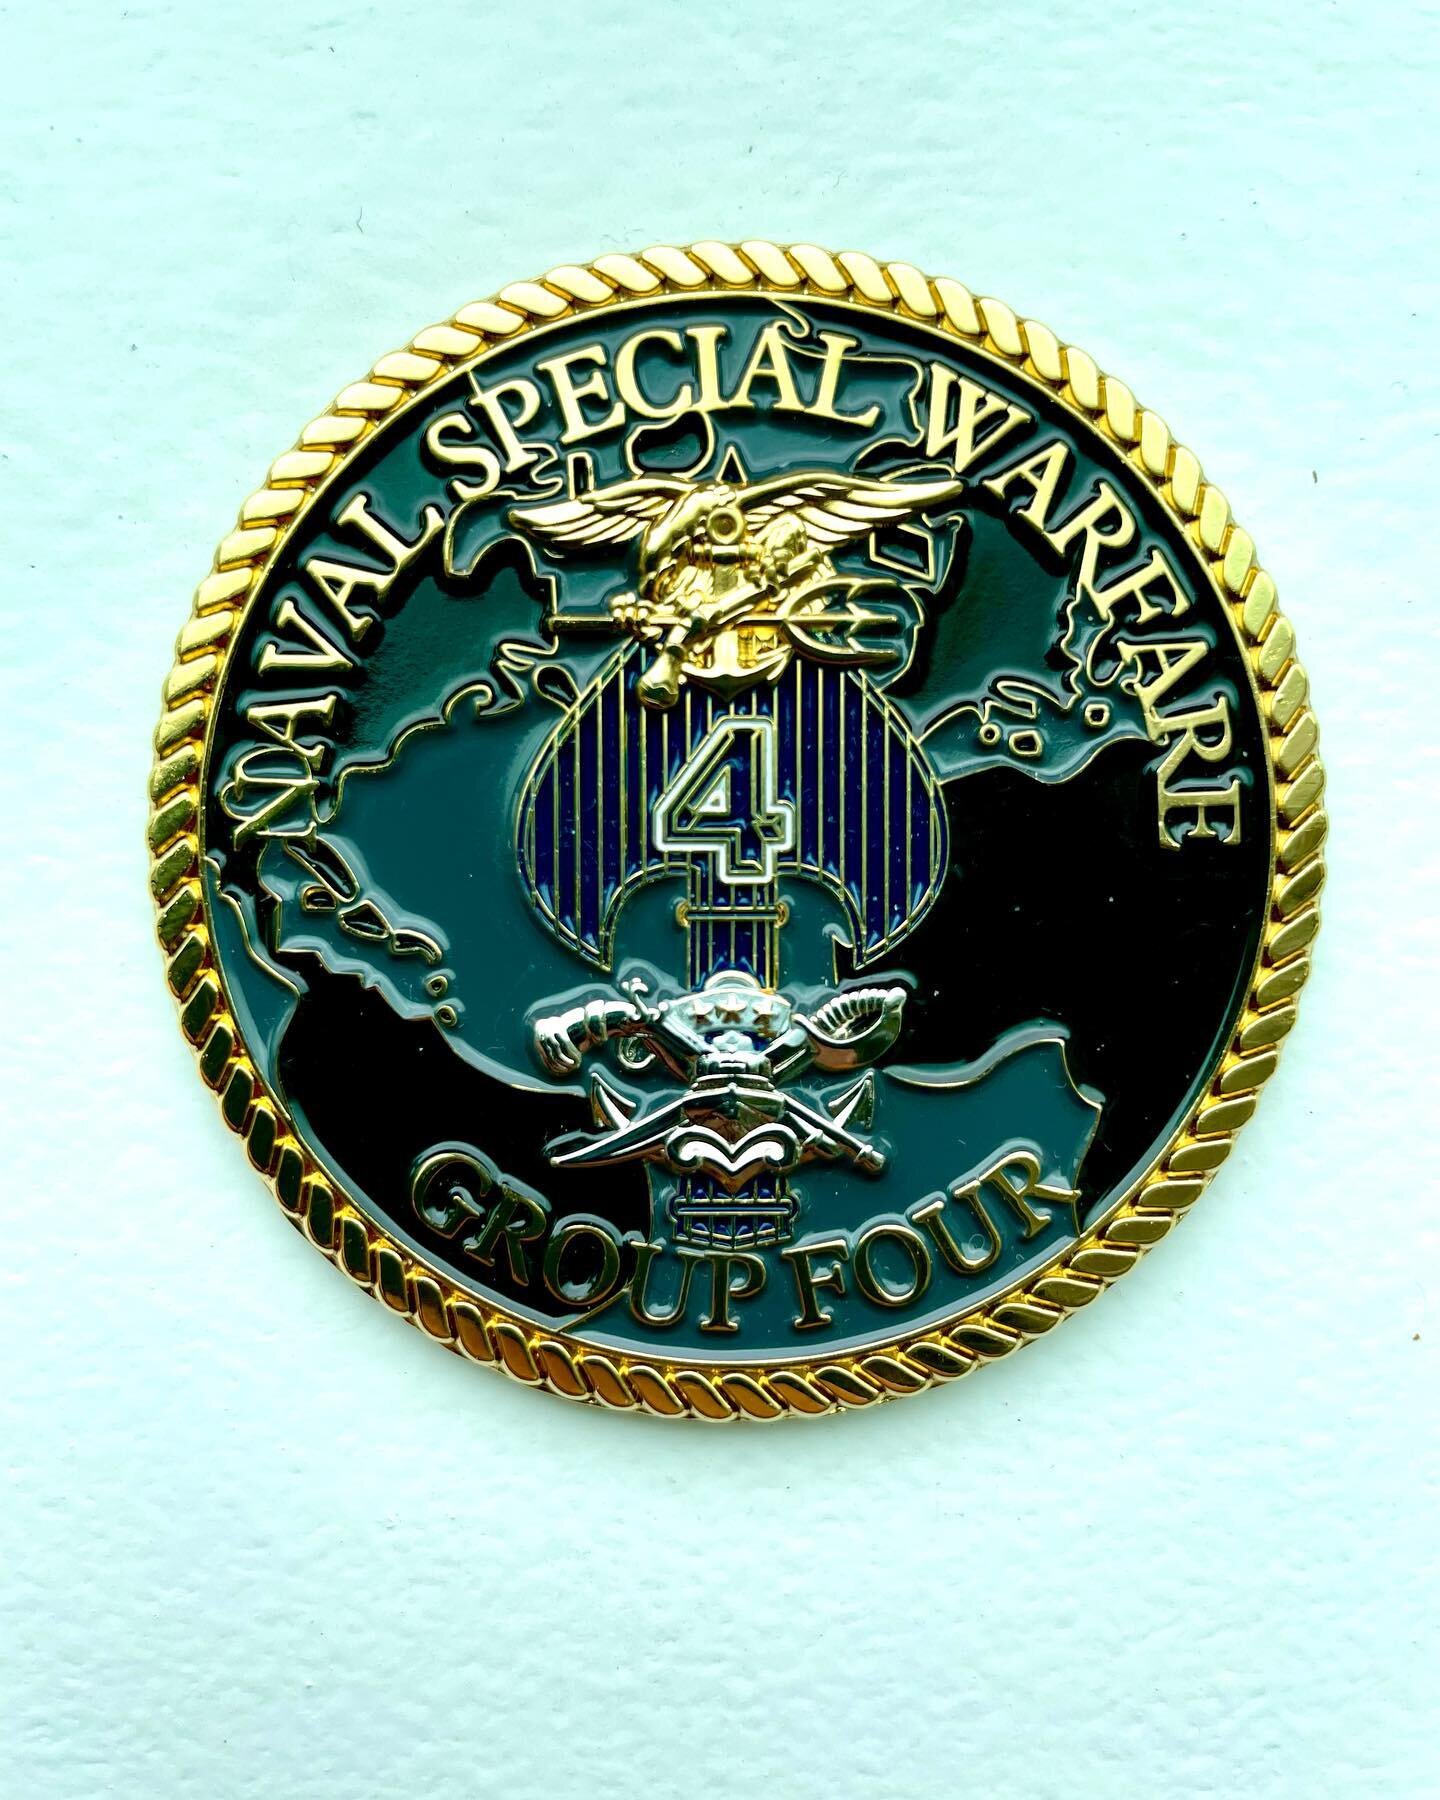 It was an absolute honor to receive a unit coin from Naval Special Warfare Group 4 Human Performance this weekend after teaching a private course on base in Virginia Beach. 🇺🇸

Physical therapists from the Army and Navy Special Operations along wit